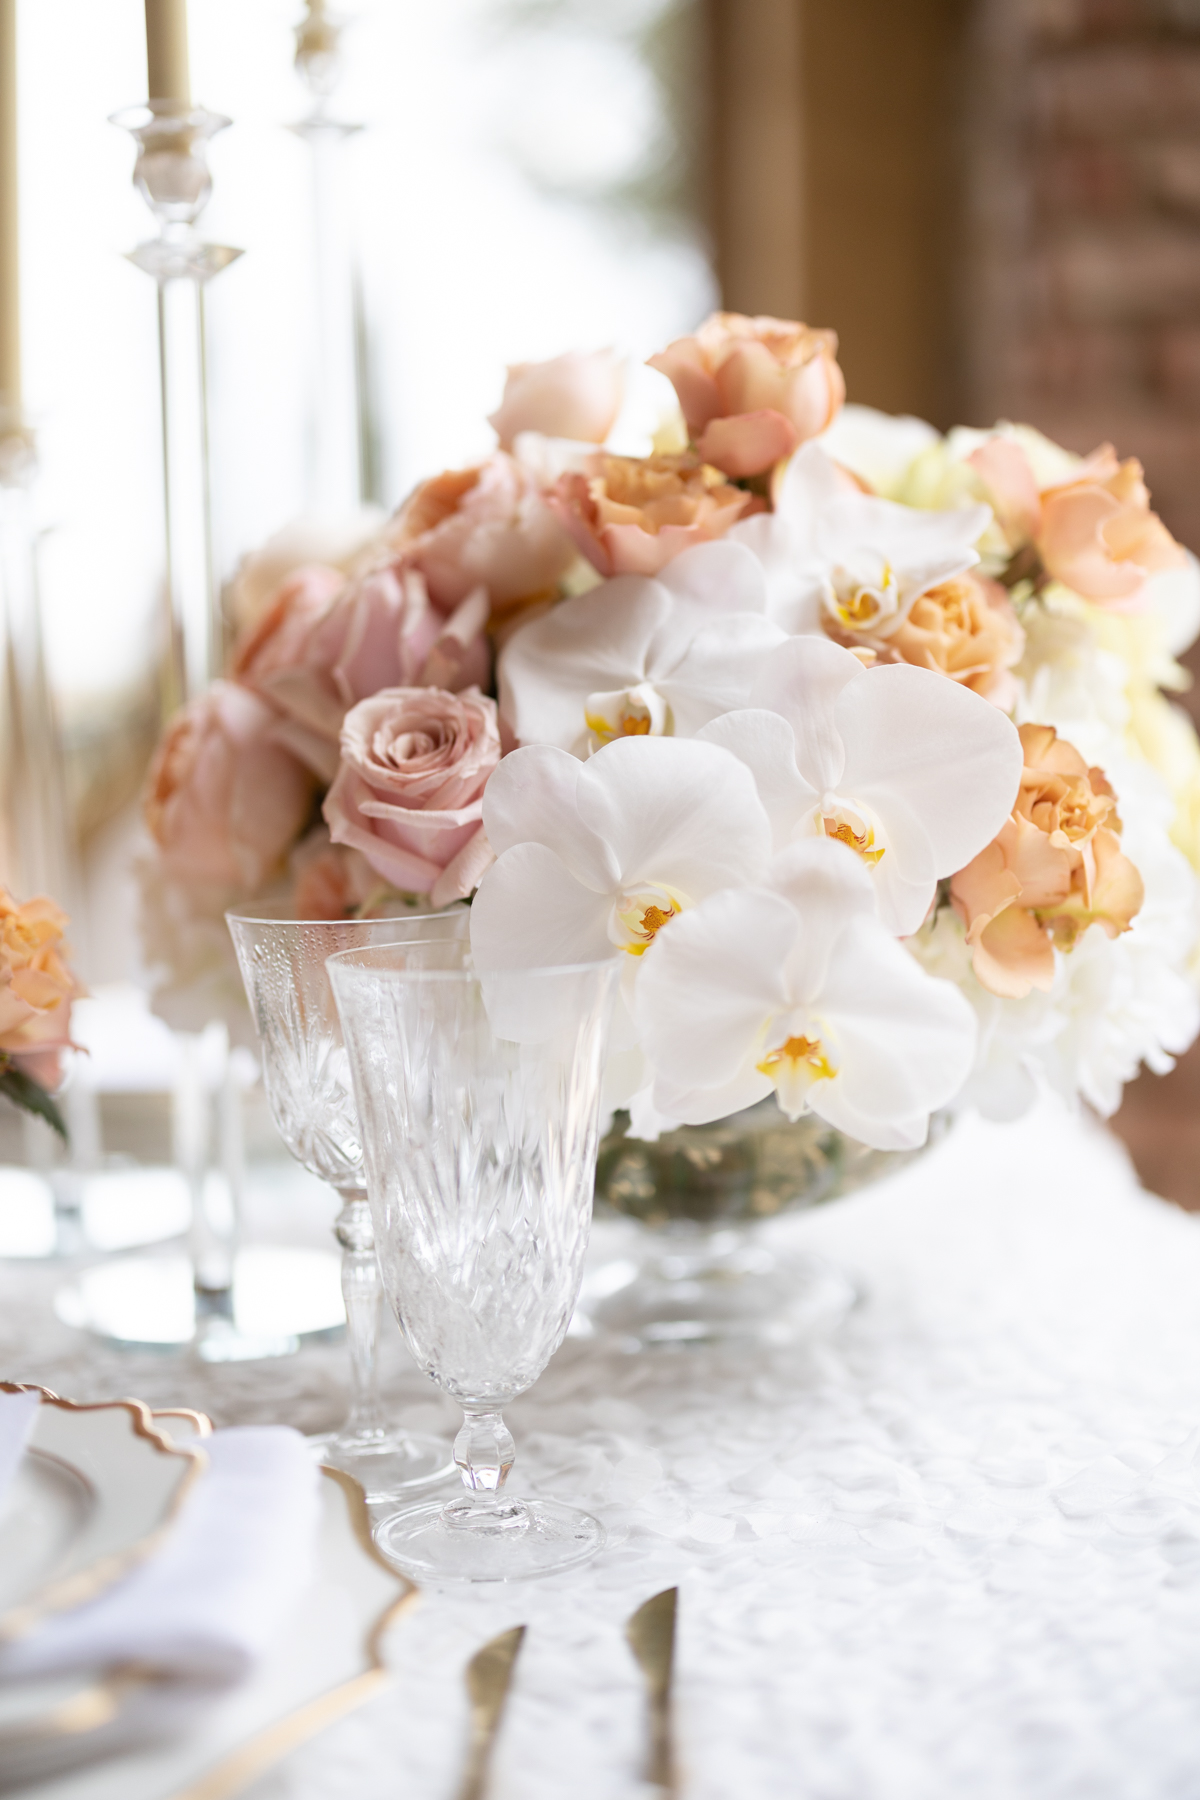 A Floral Fairytale Inspiration That You Have To See To Believe